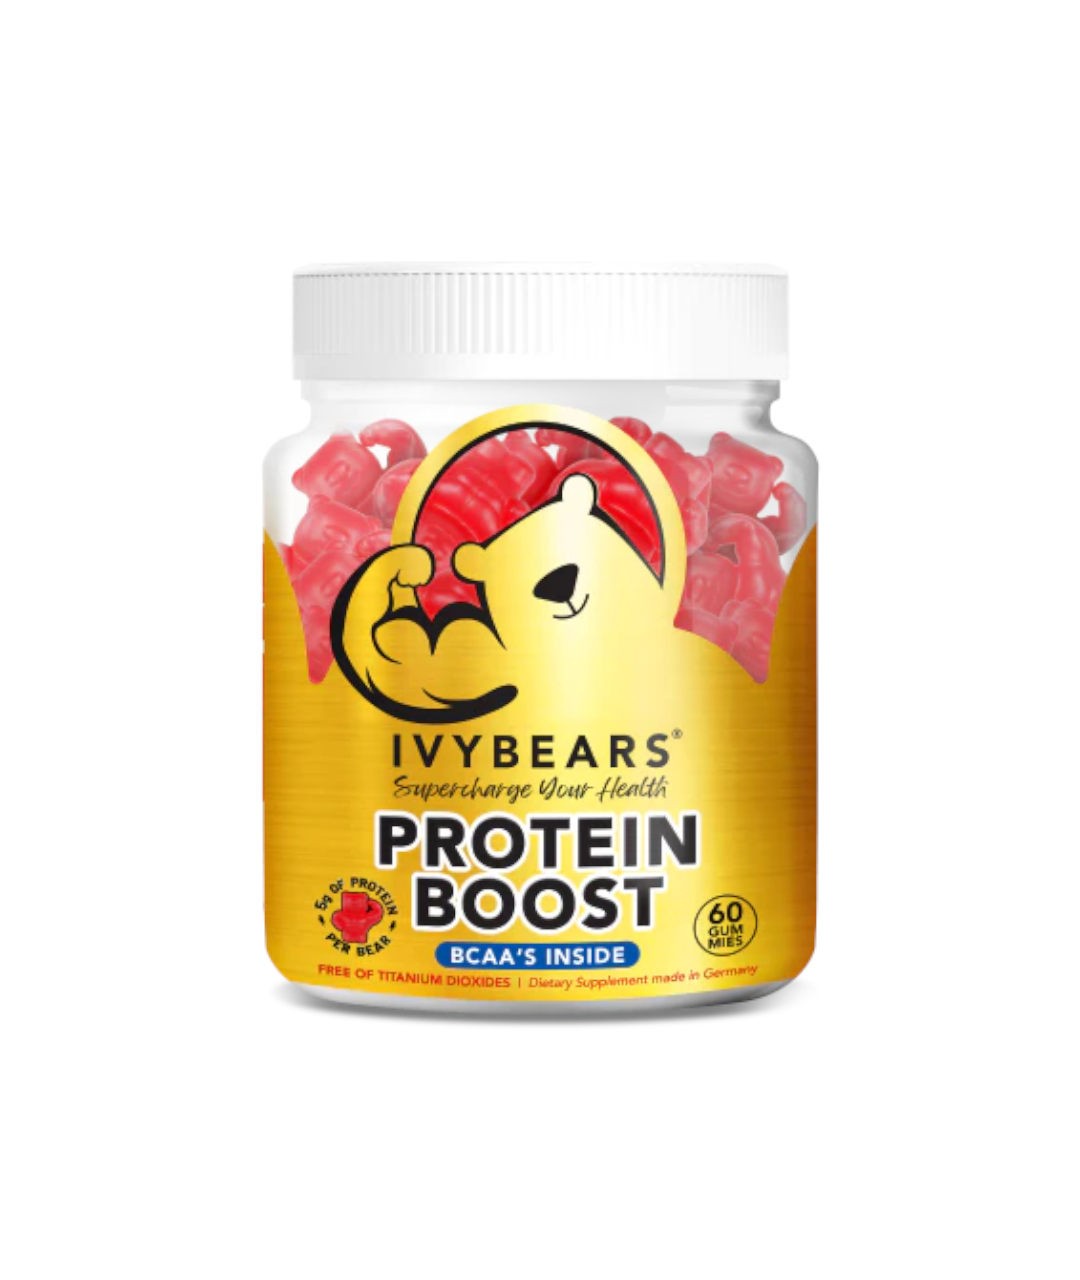 Protein Boost 60 Jelly Beans